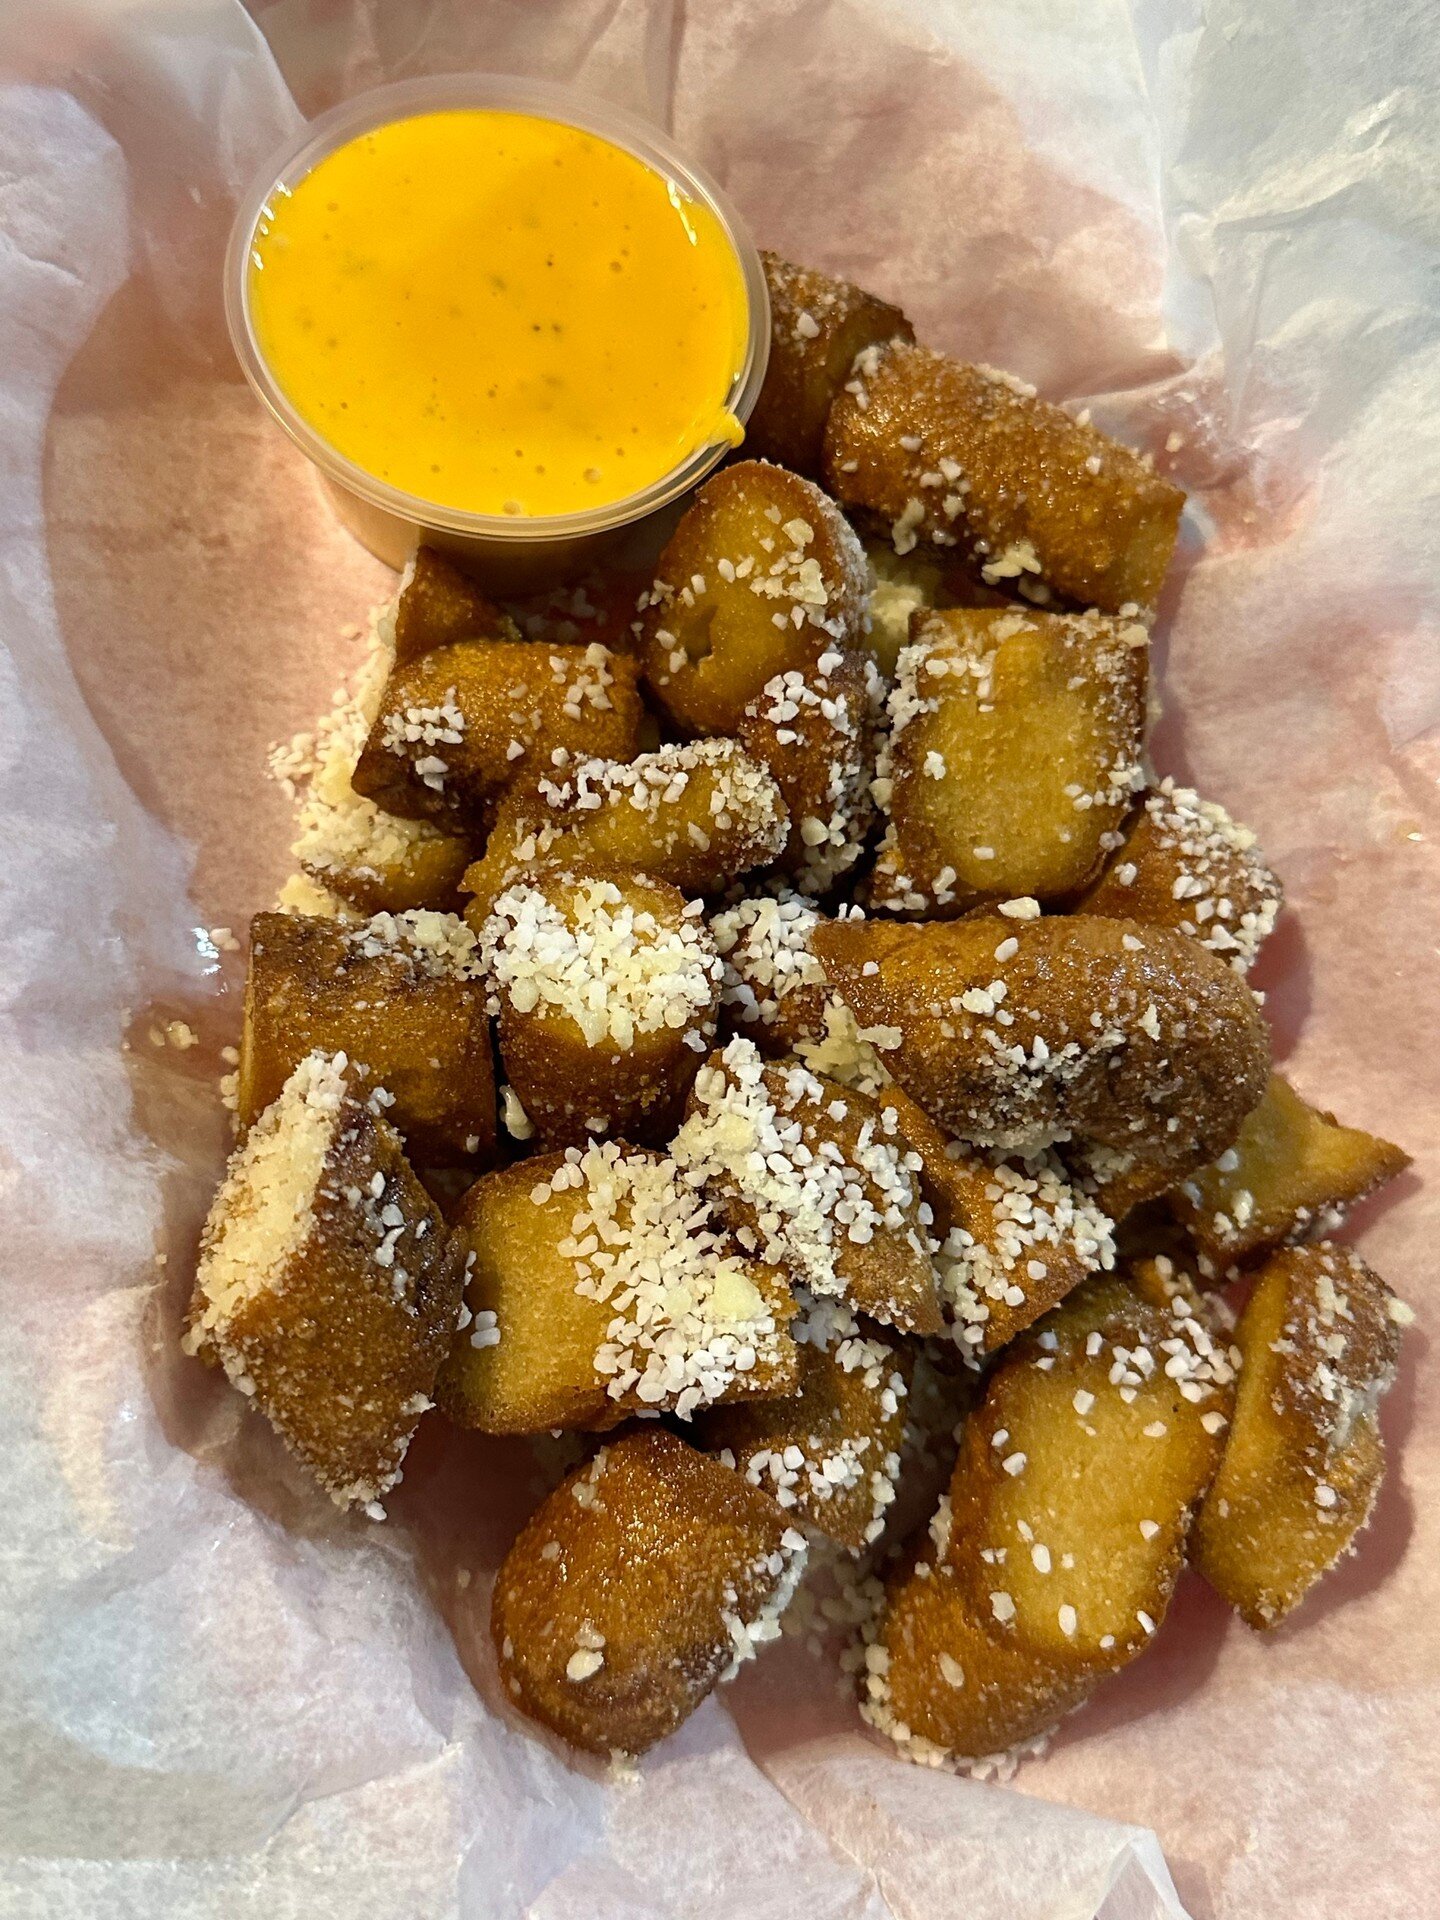 We have Garlic Parmesan Pretzel Bites, served with our house-made cheese sauce for $5.00. Get 'em while they last!

#vinnies #stl #eatstl #foodie #stlouisfoods #stlfoods #greek #italian #lindenwoodpark #sandwiches #special #lunch #dinner #smallbusine